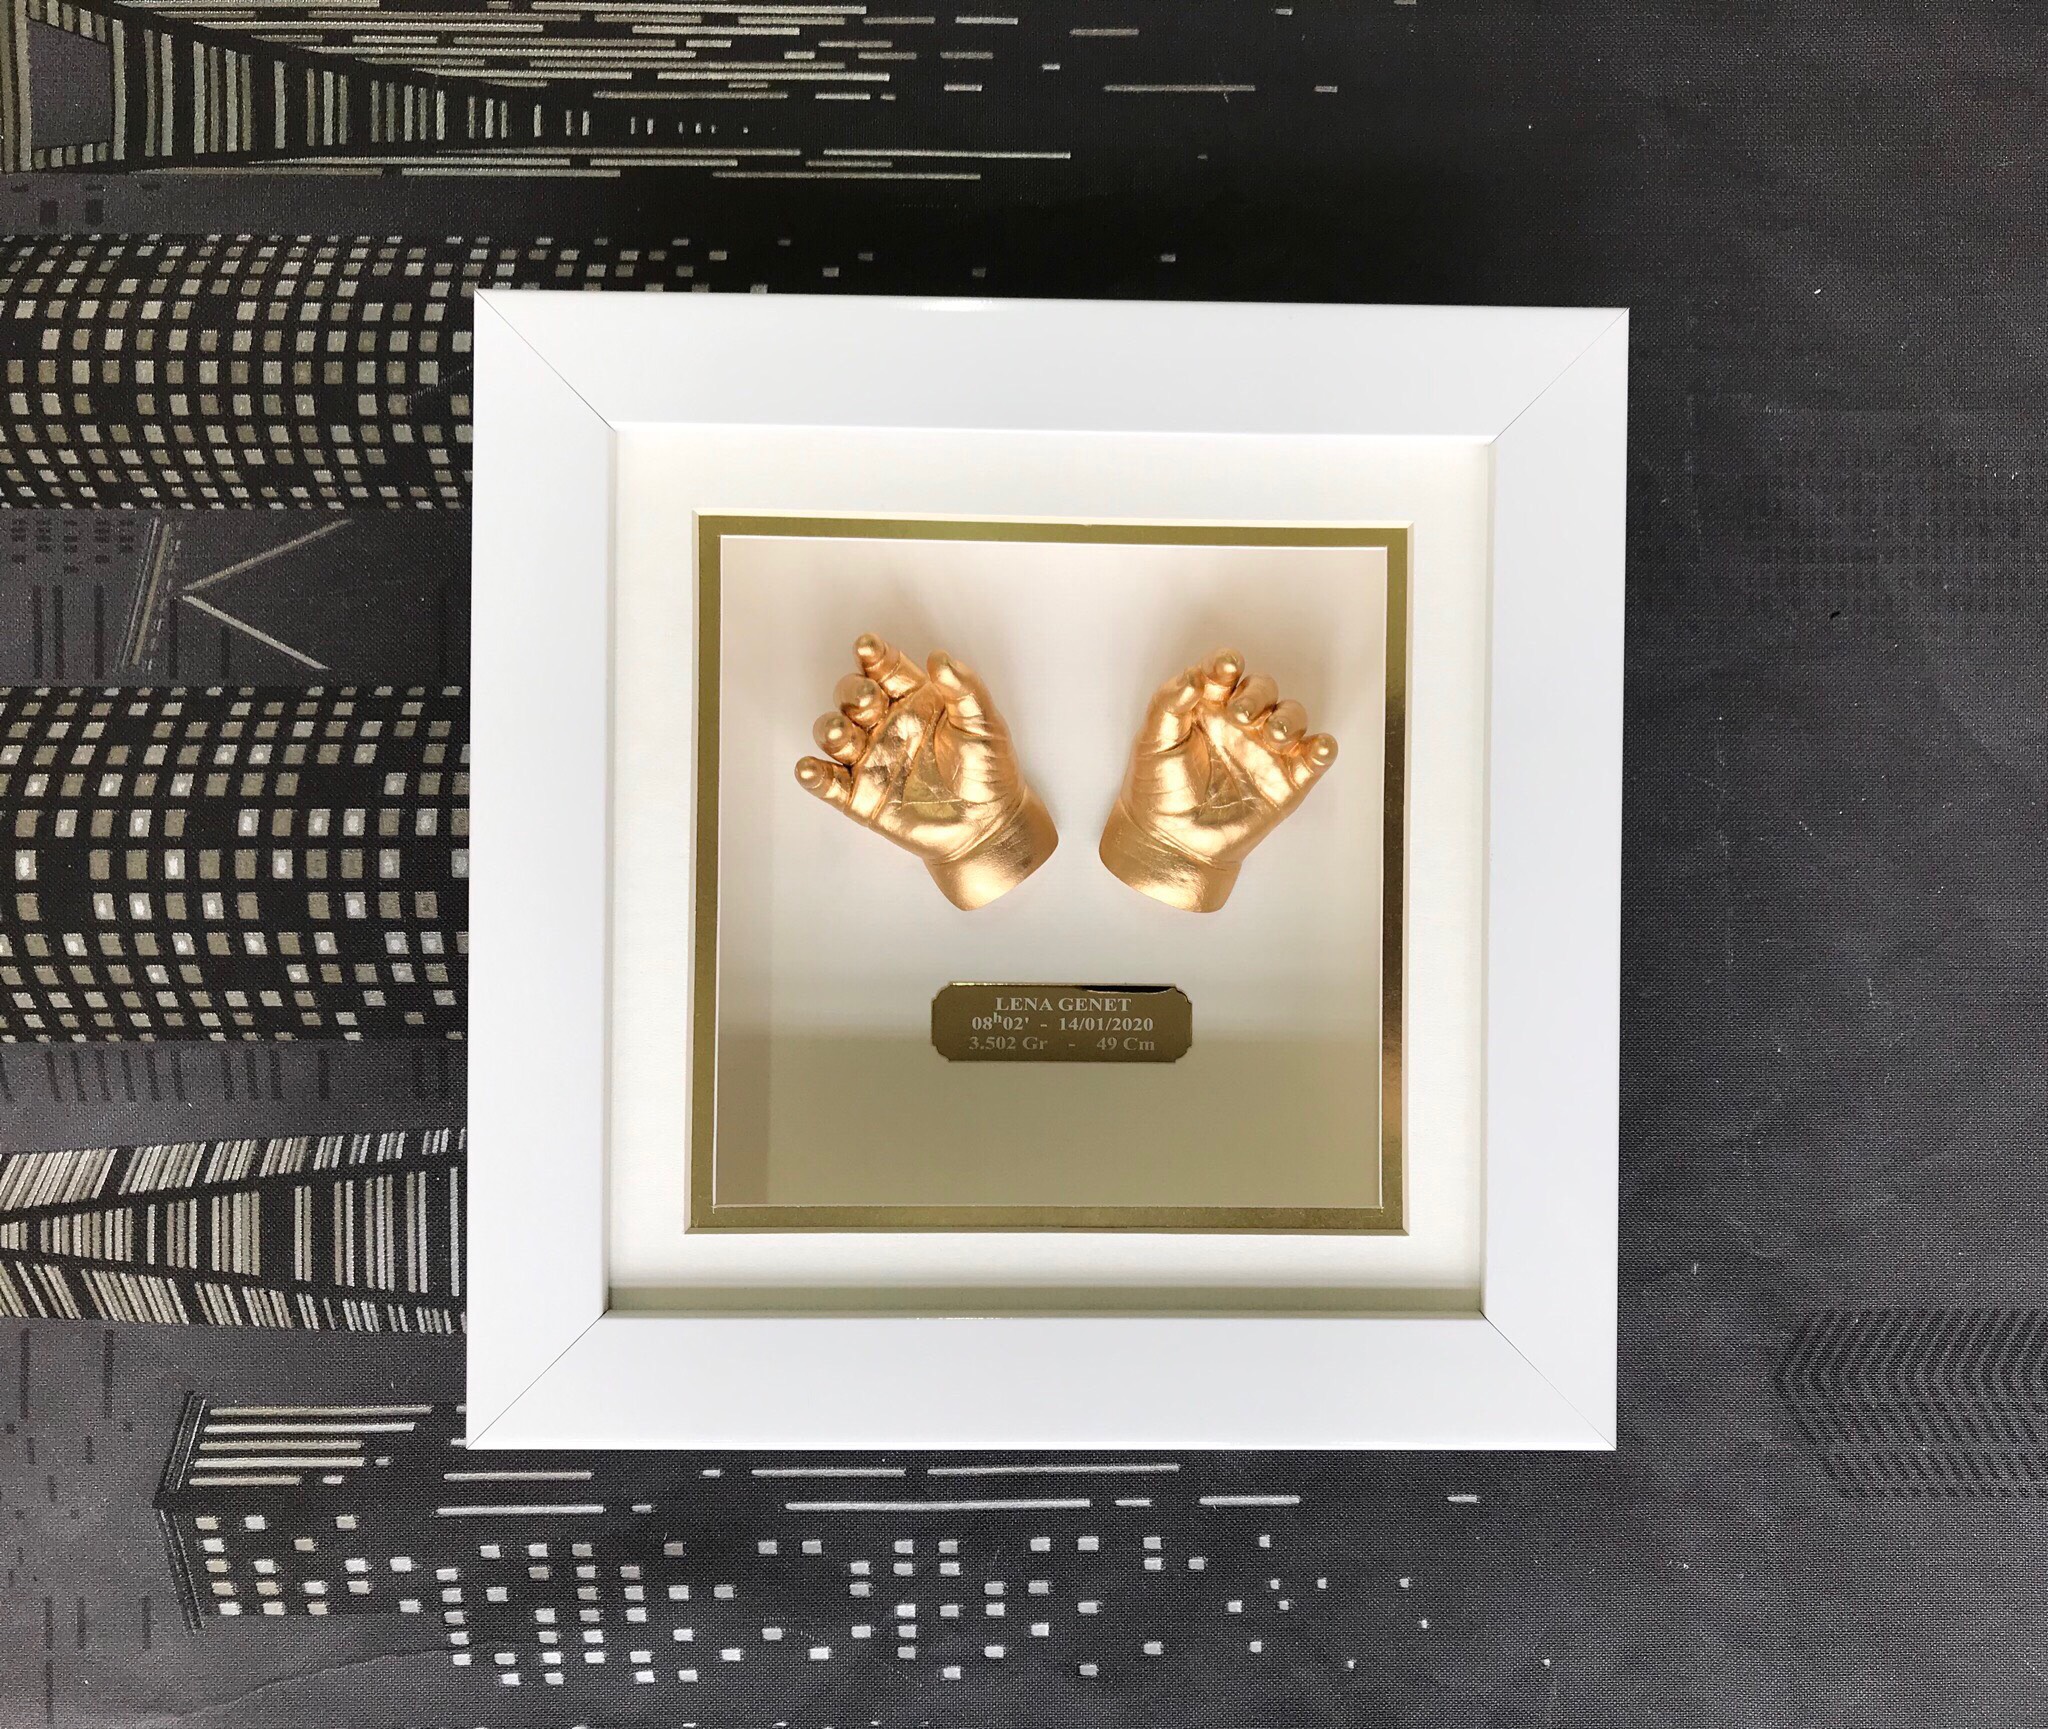 Baby hand and feet casting 20x20 cm